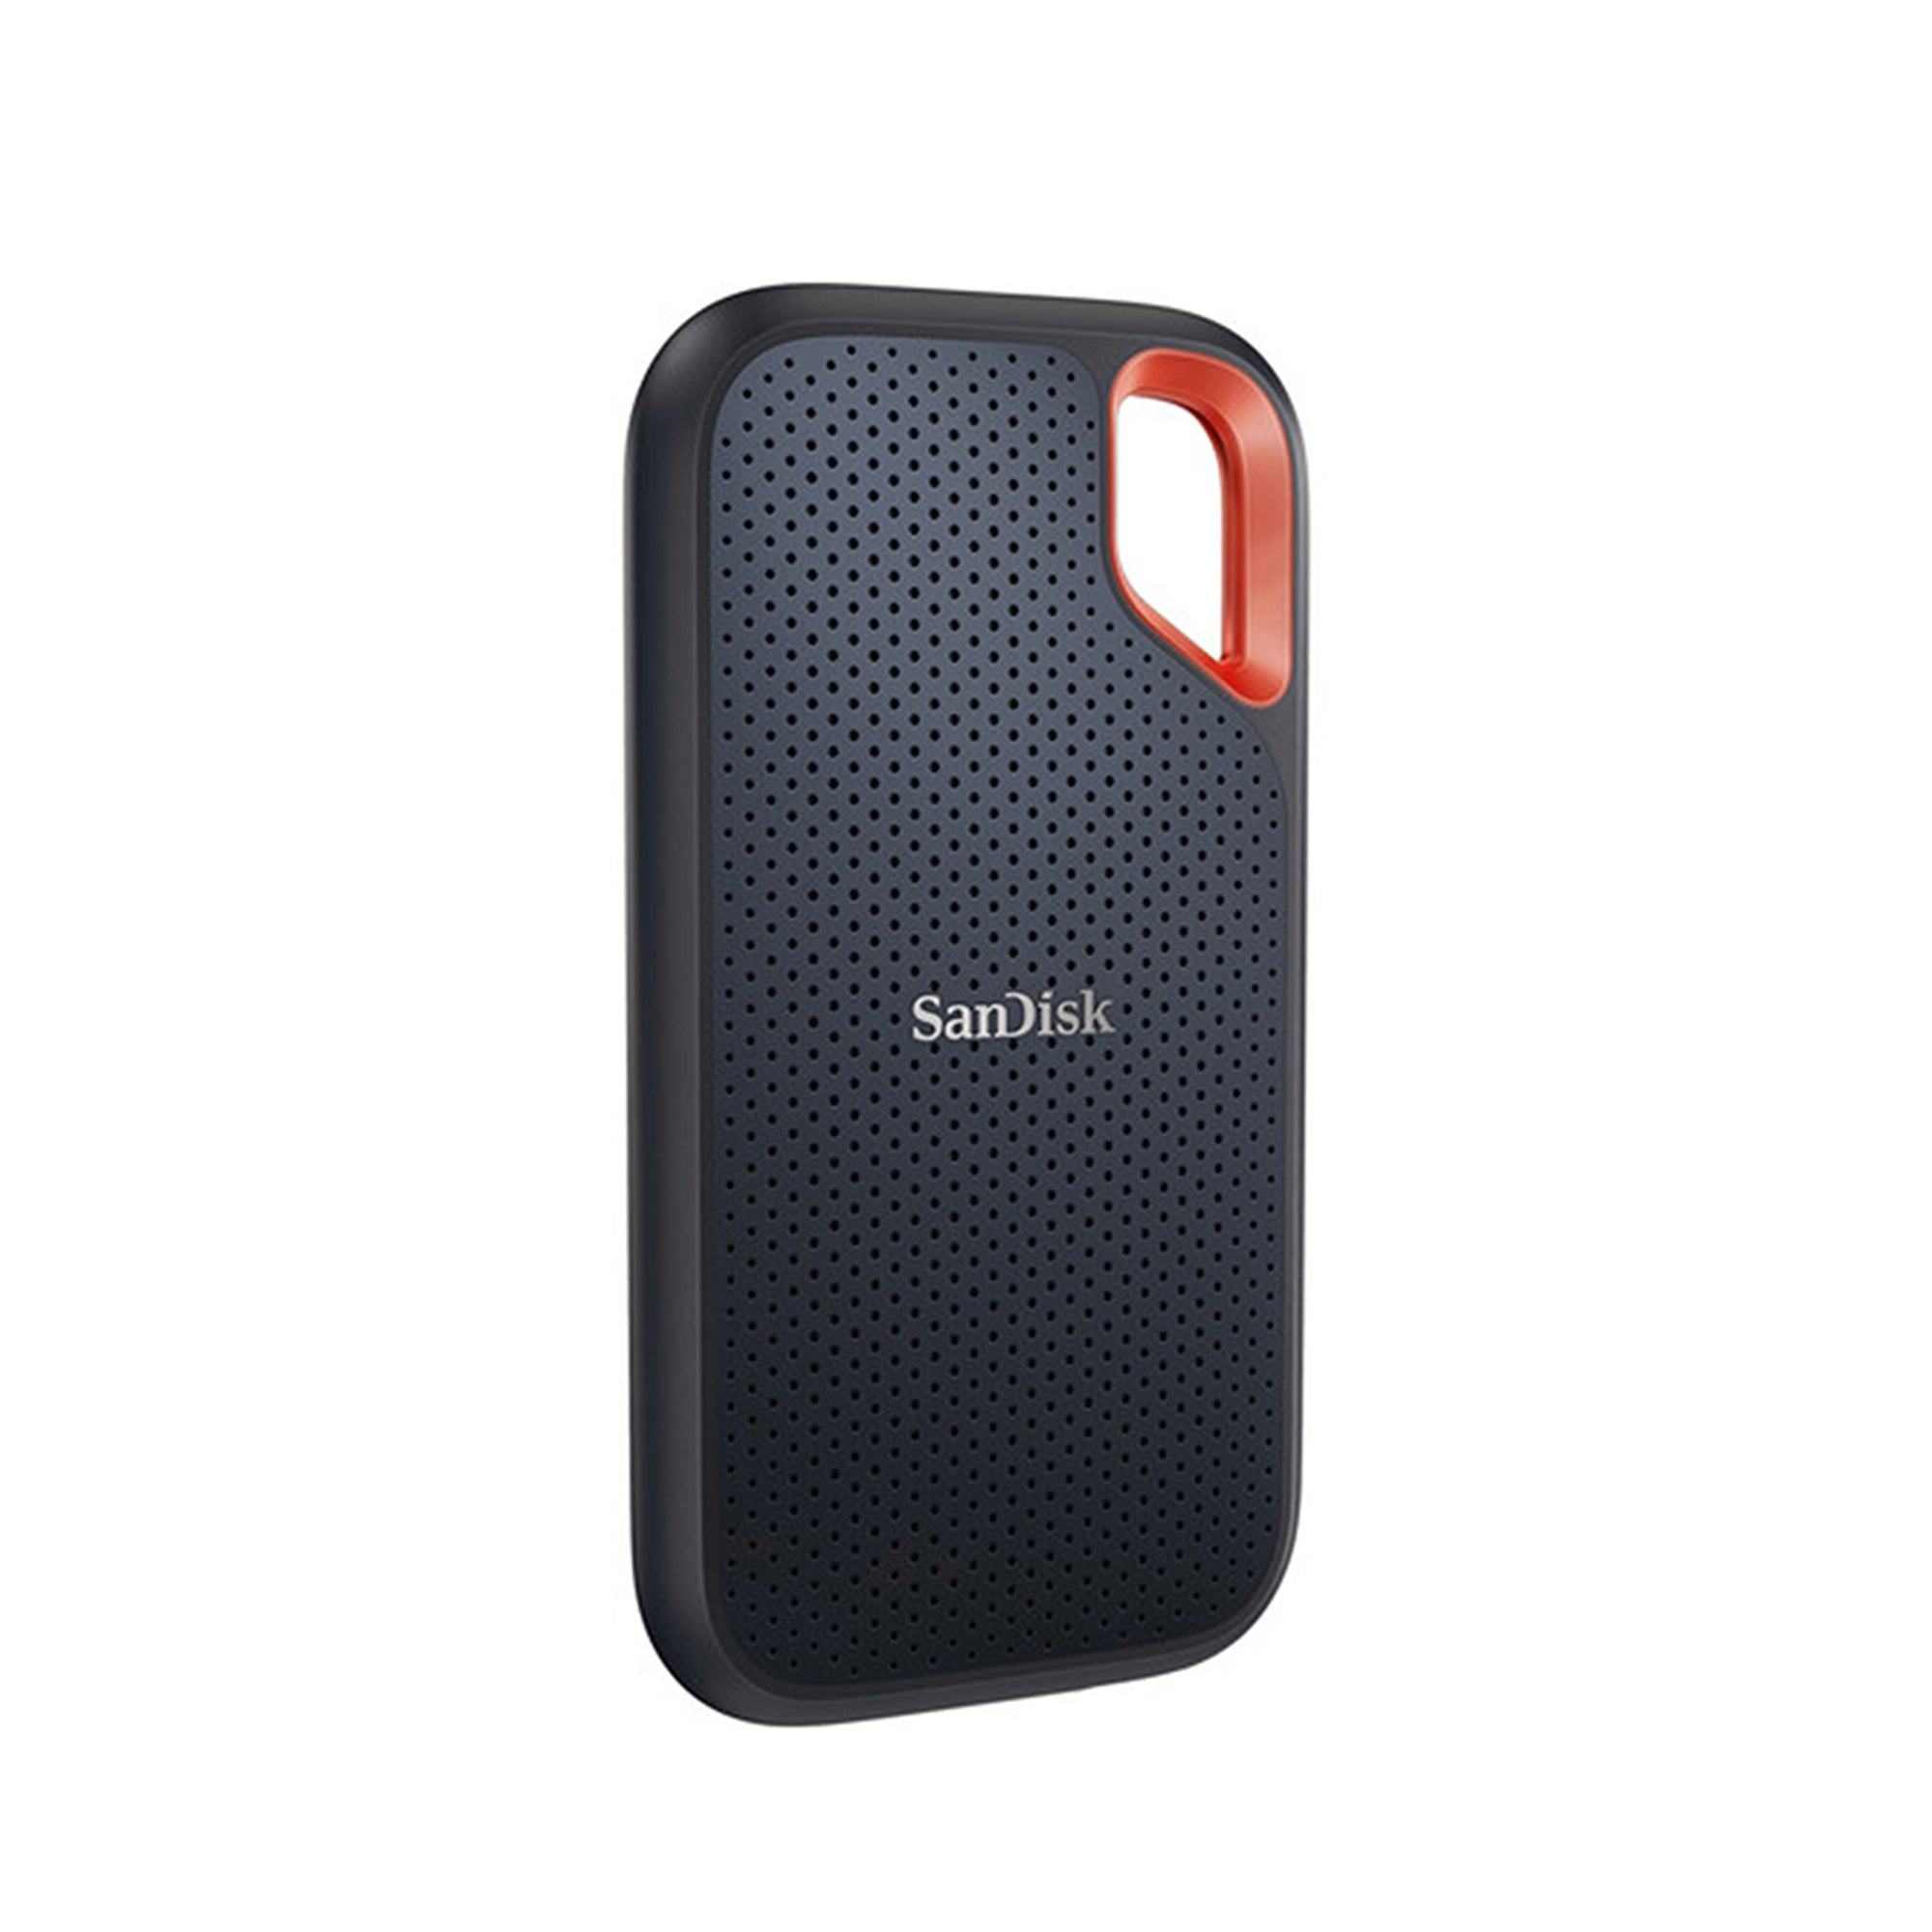 SanDisk Extreme® Portable SSD 4TB V2 Up to 1050 MB/s Read Speed